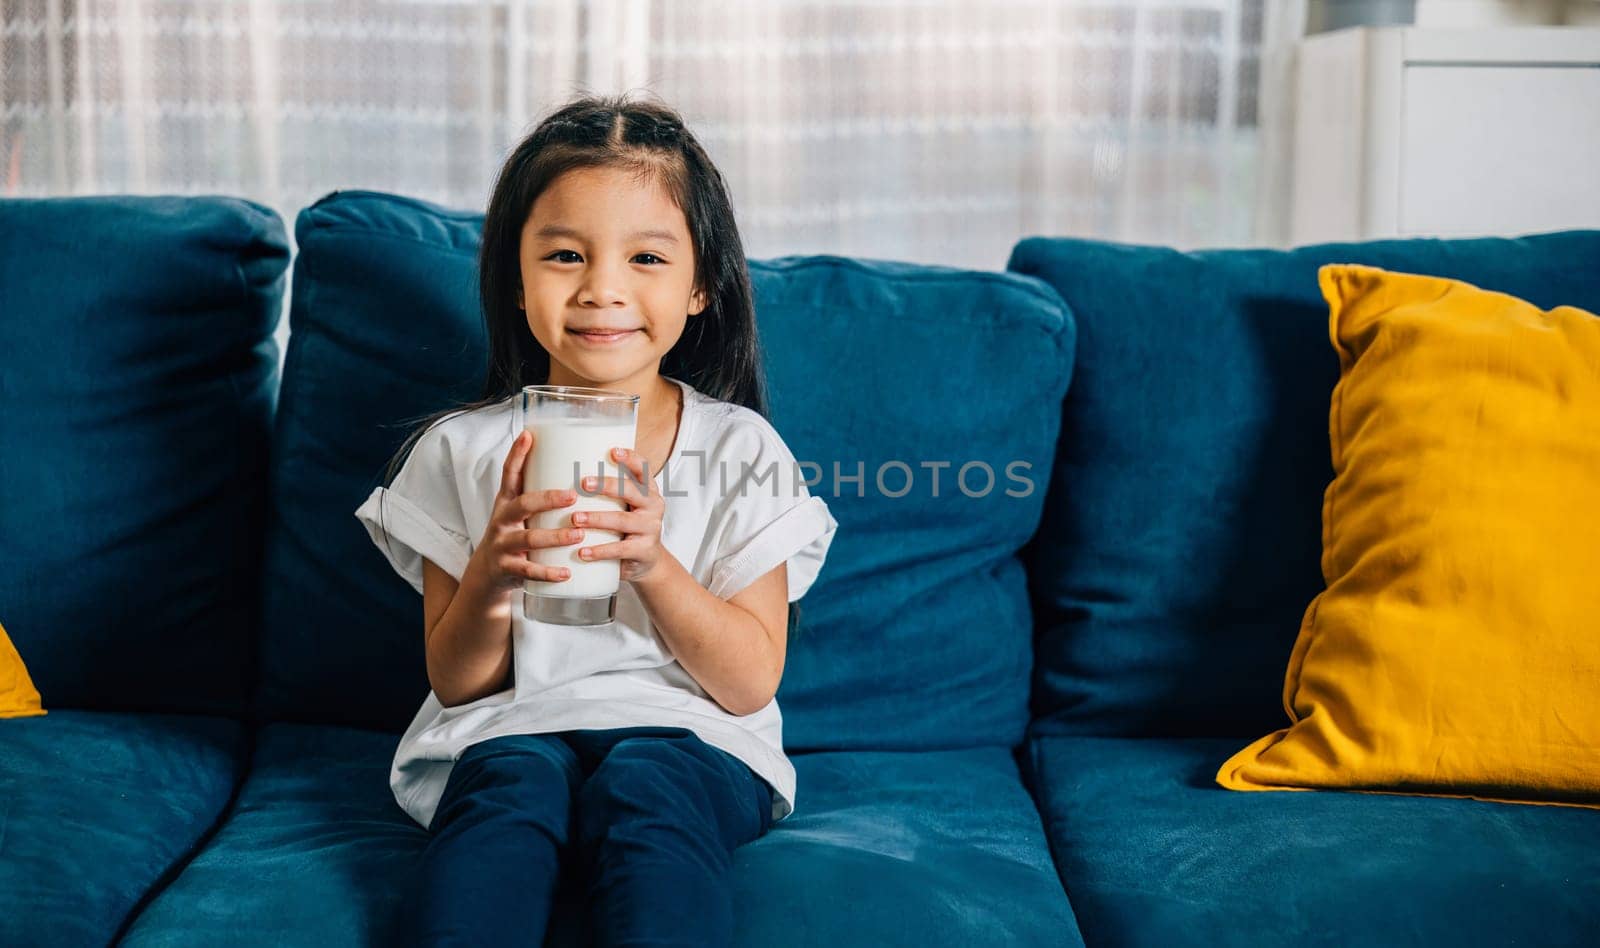 Asian child enjoys a glass of milk on the sofa their happiness and innocence shining through by Sorapop